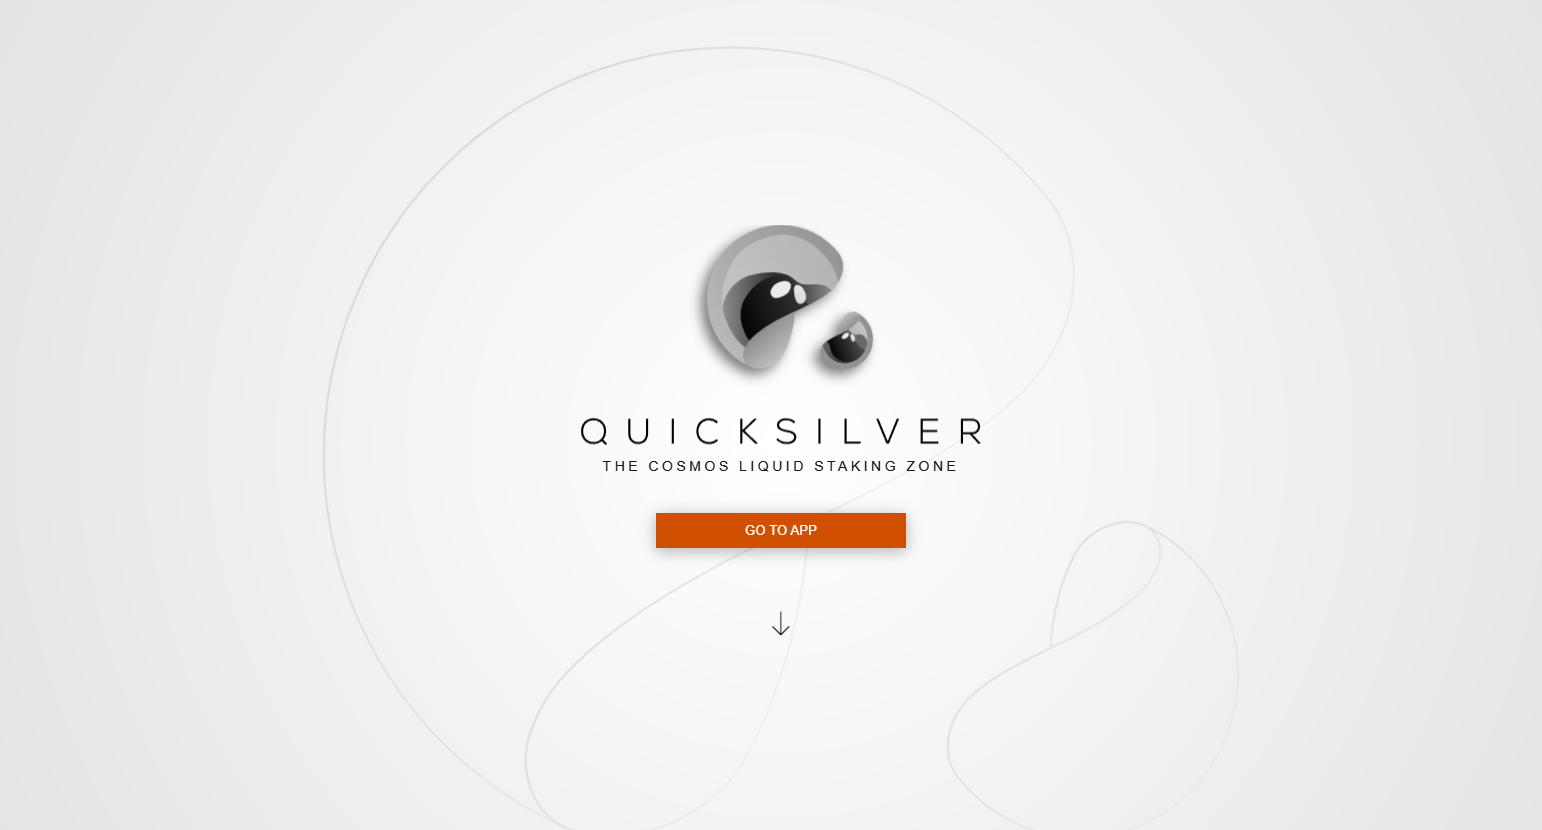 What is Quicksilver?